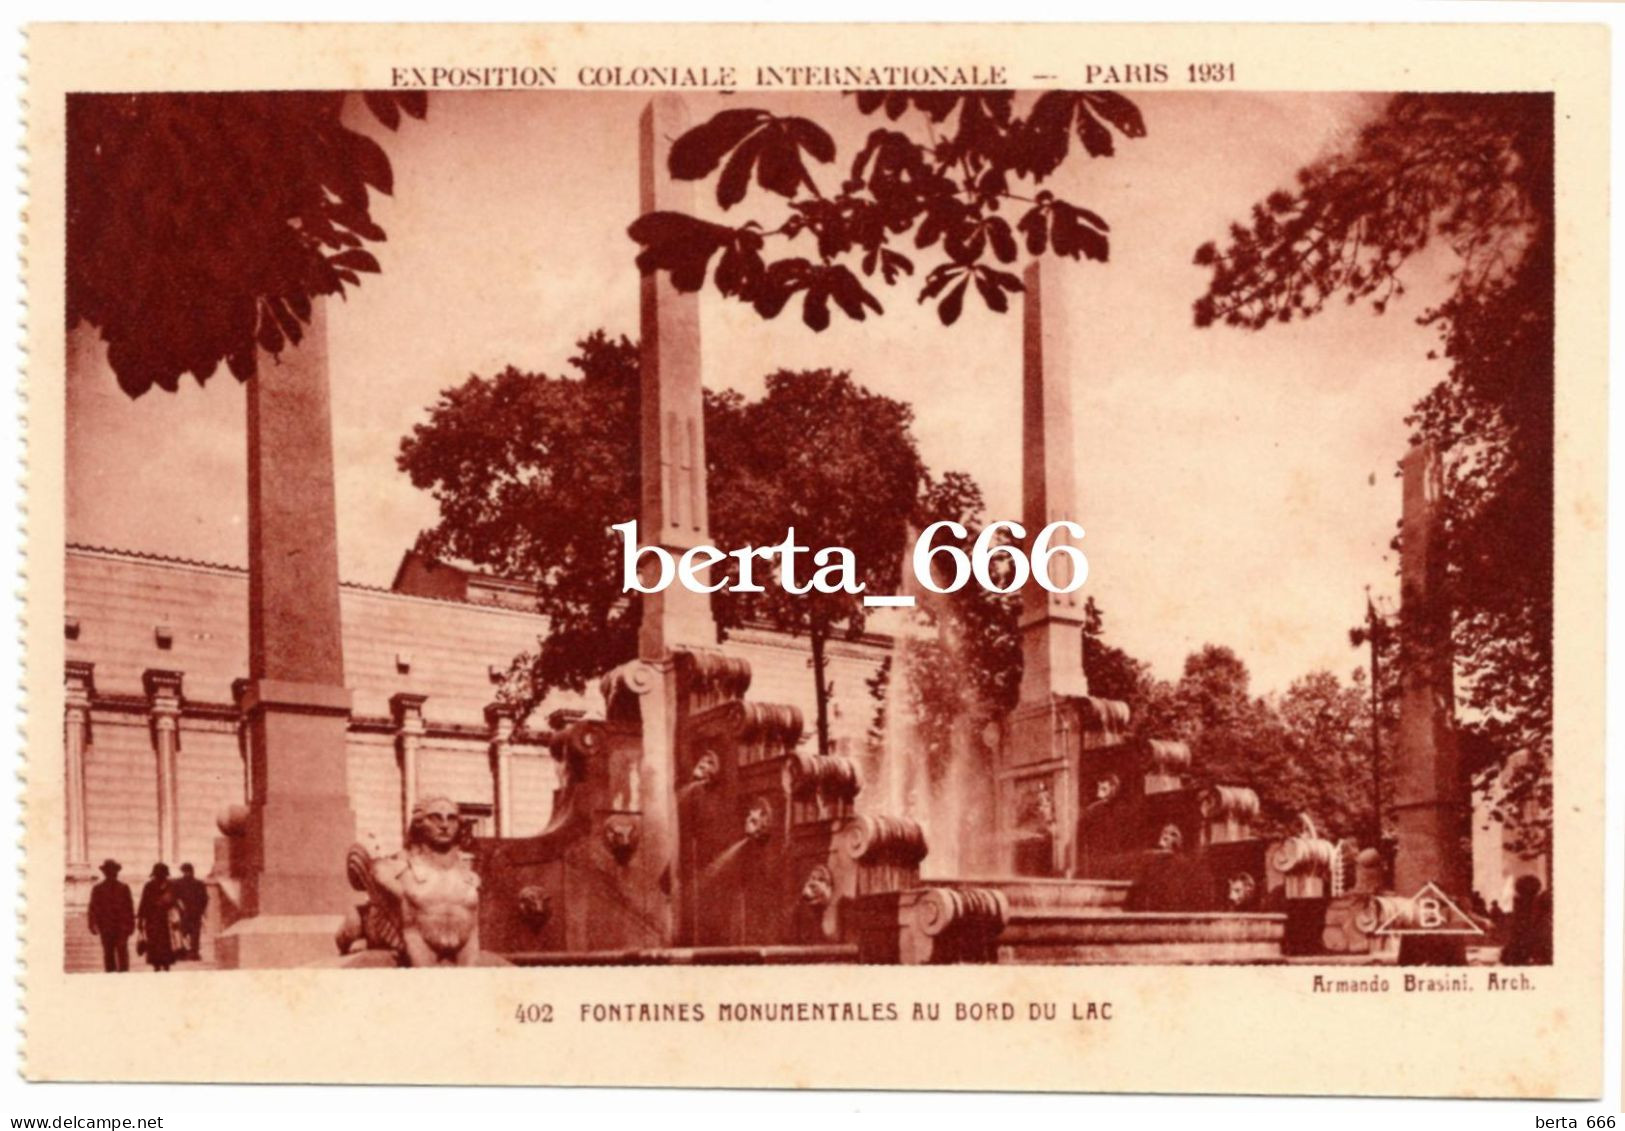 Paris Colonial Exposition 1931 Italy Fountains - Exhibitions